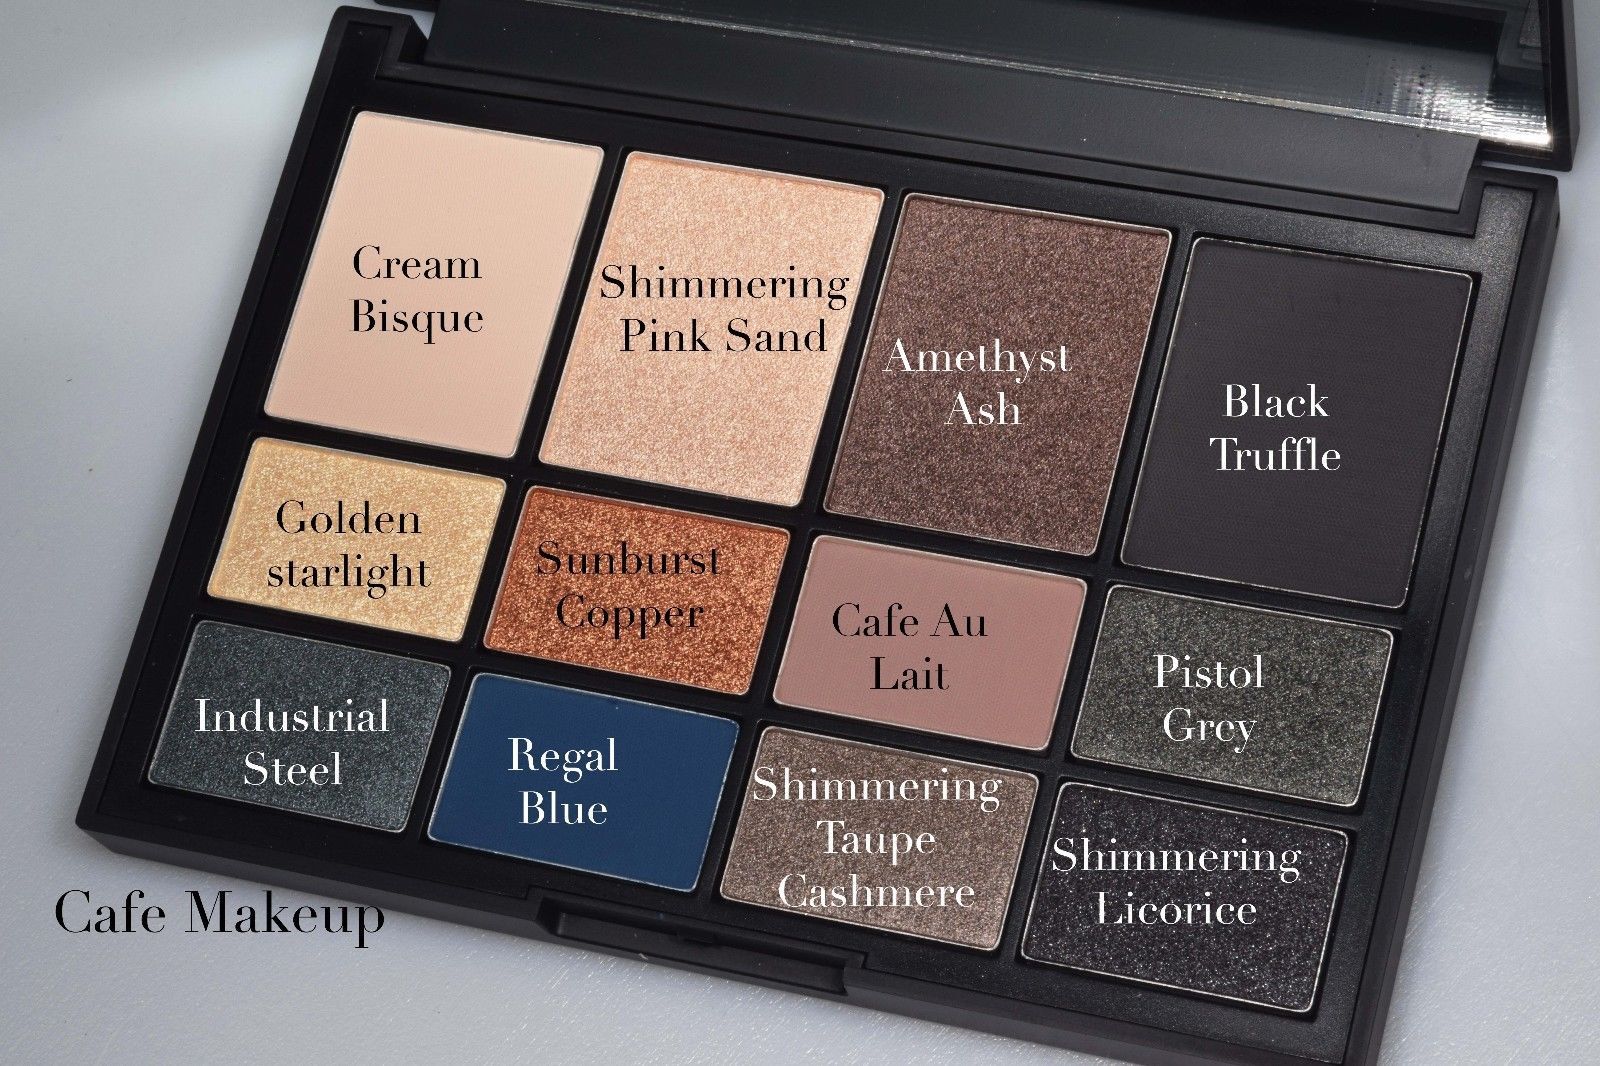 NARS NARSissist L'Amour, Toujours L'Amour Eyeshadow Palette